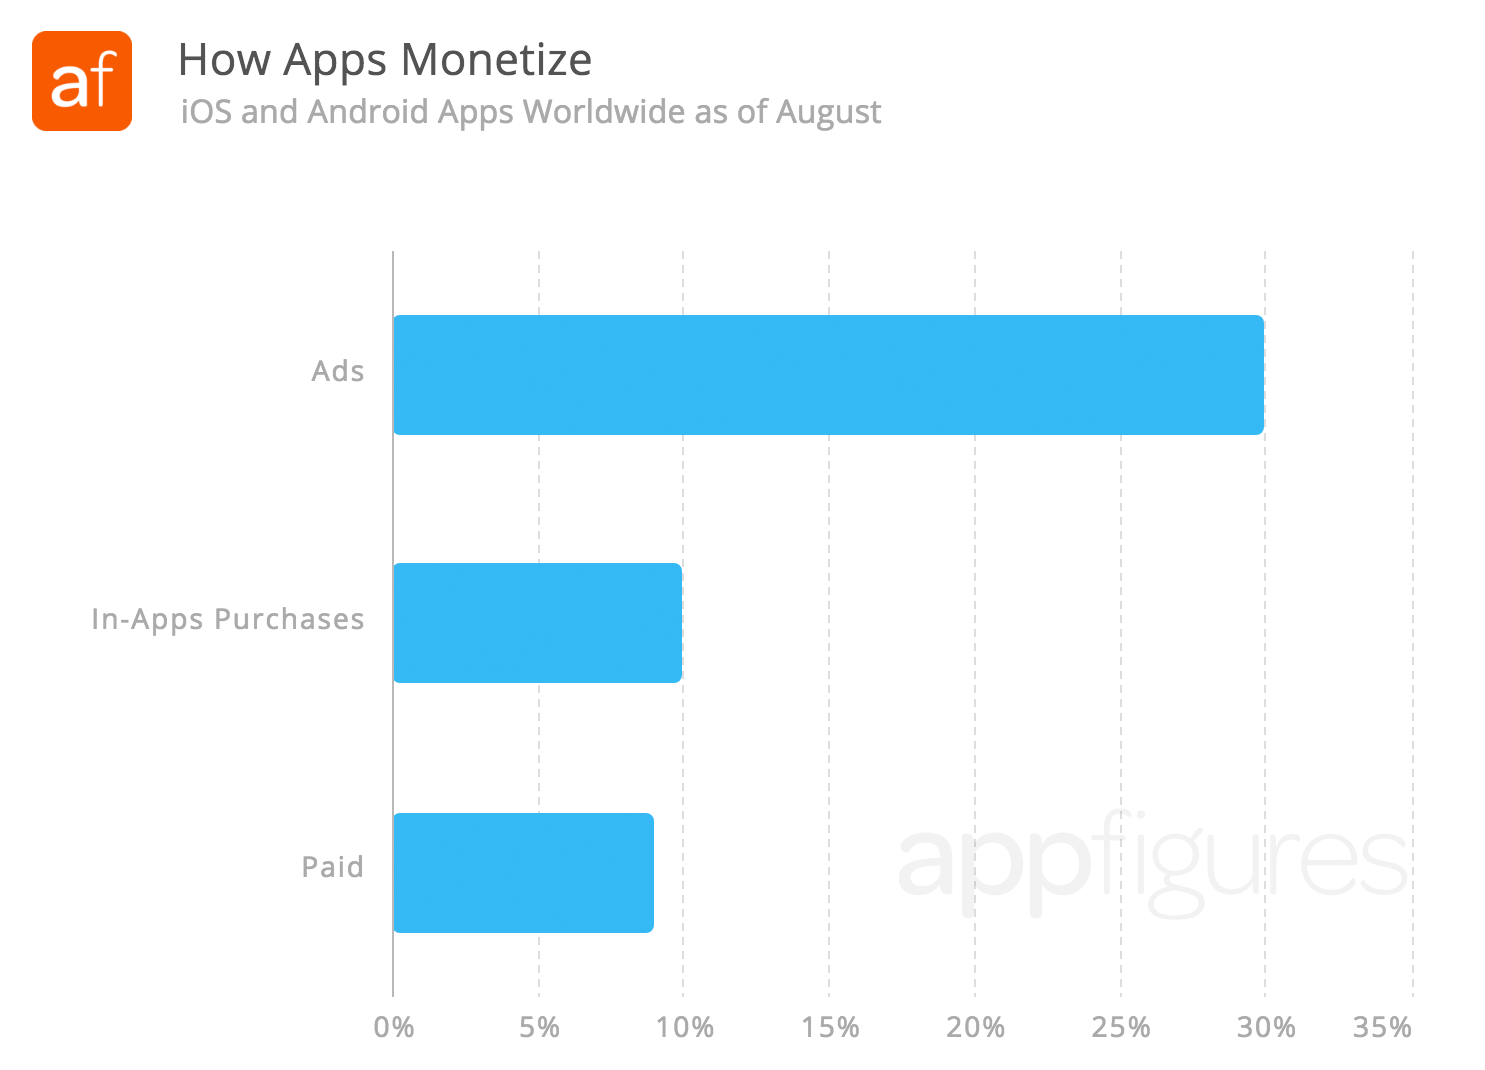 11% of all free iOS and Android apps monetize with in-app purchases. Half of those are Games.